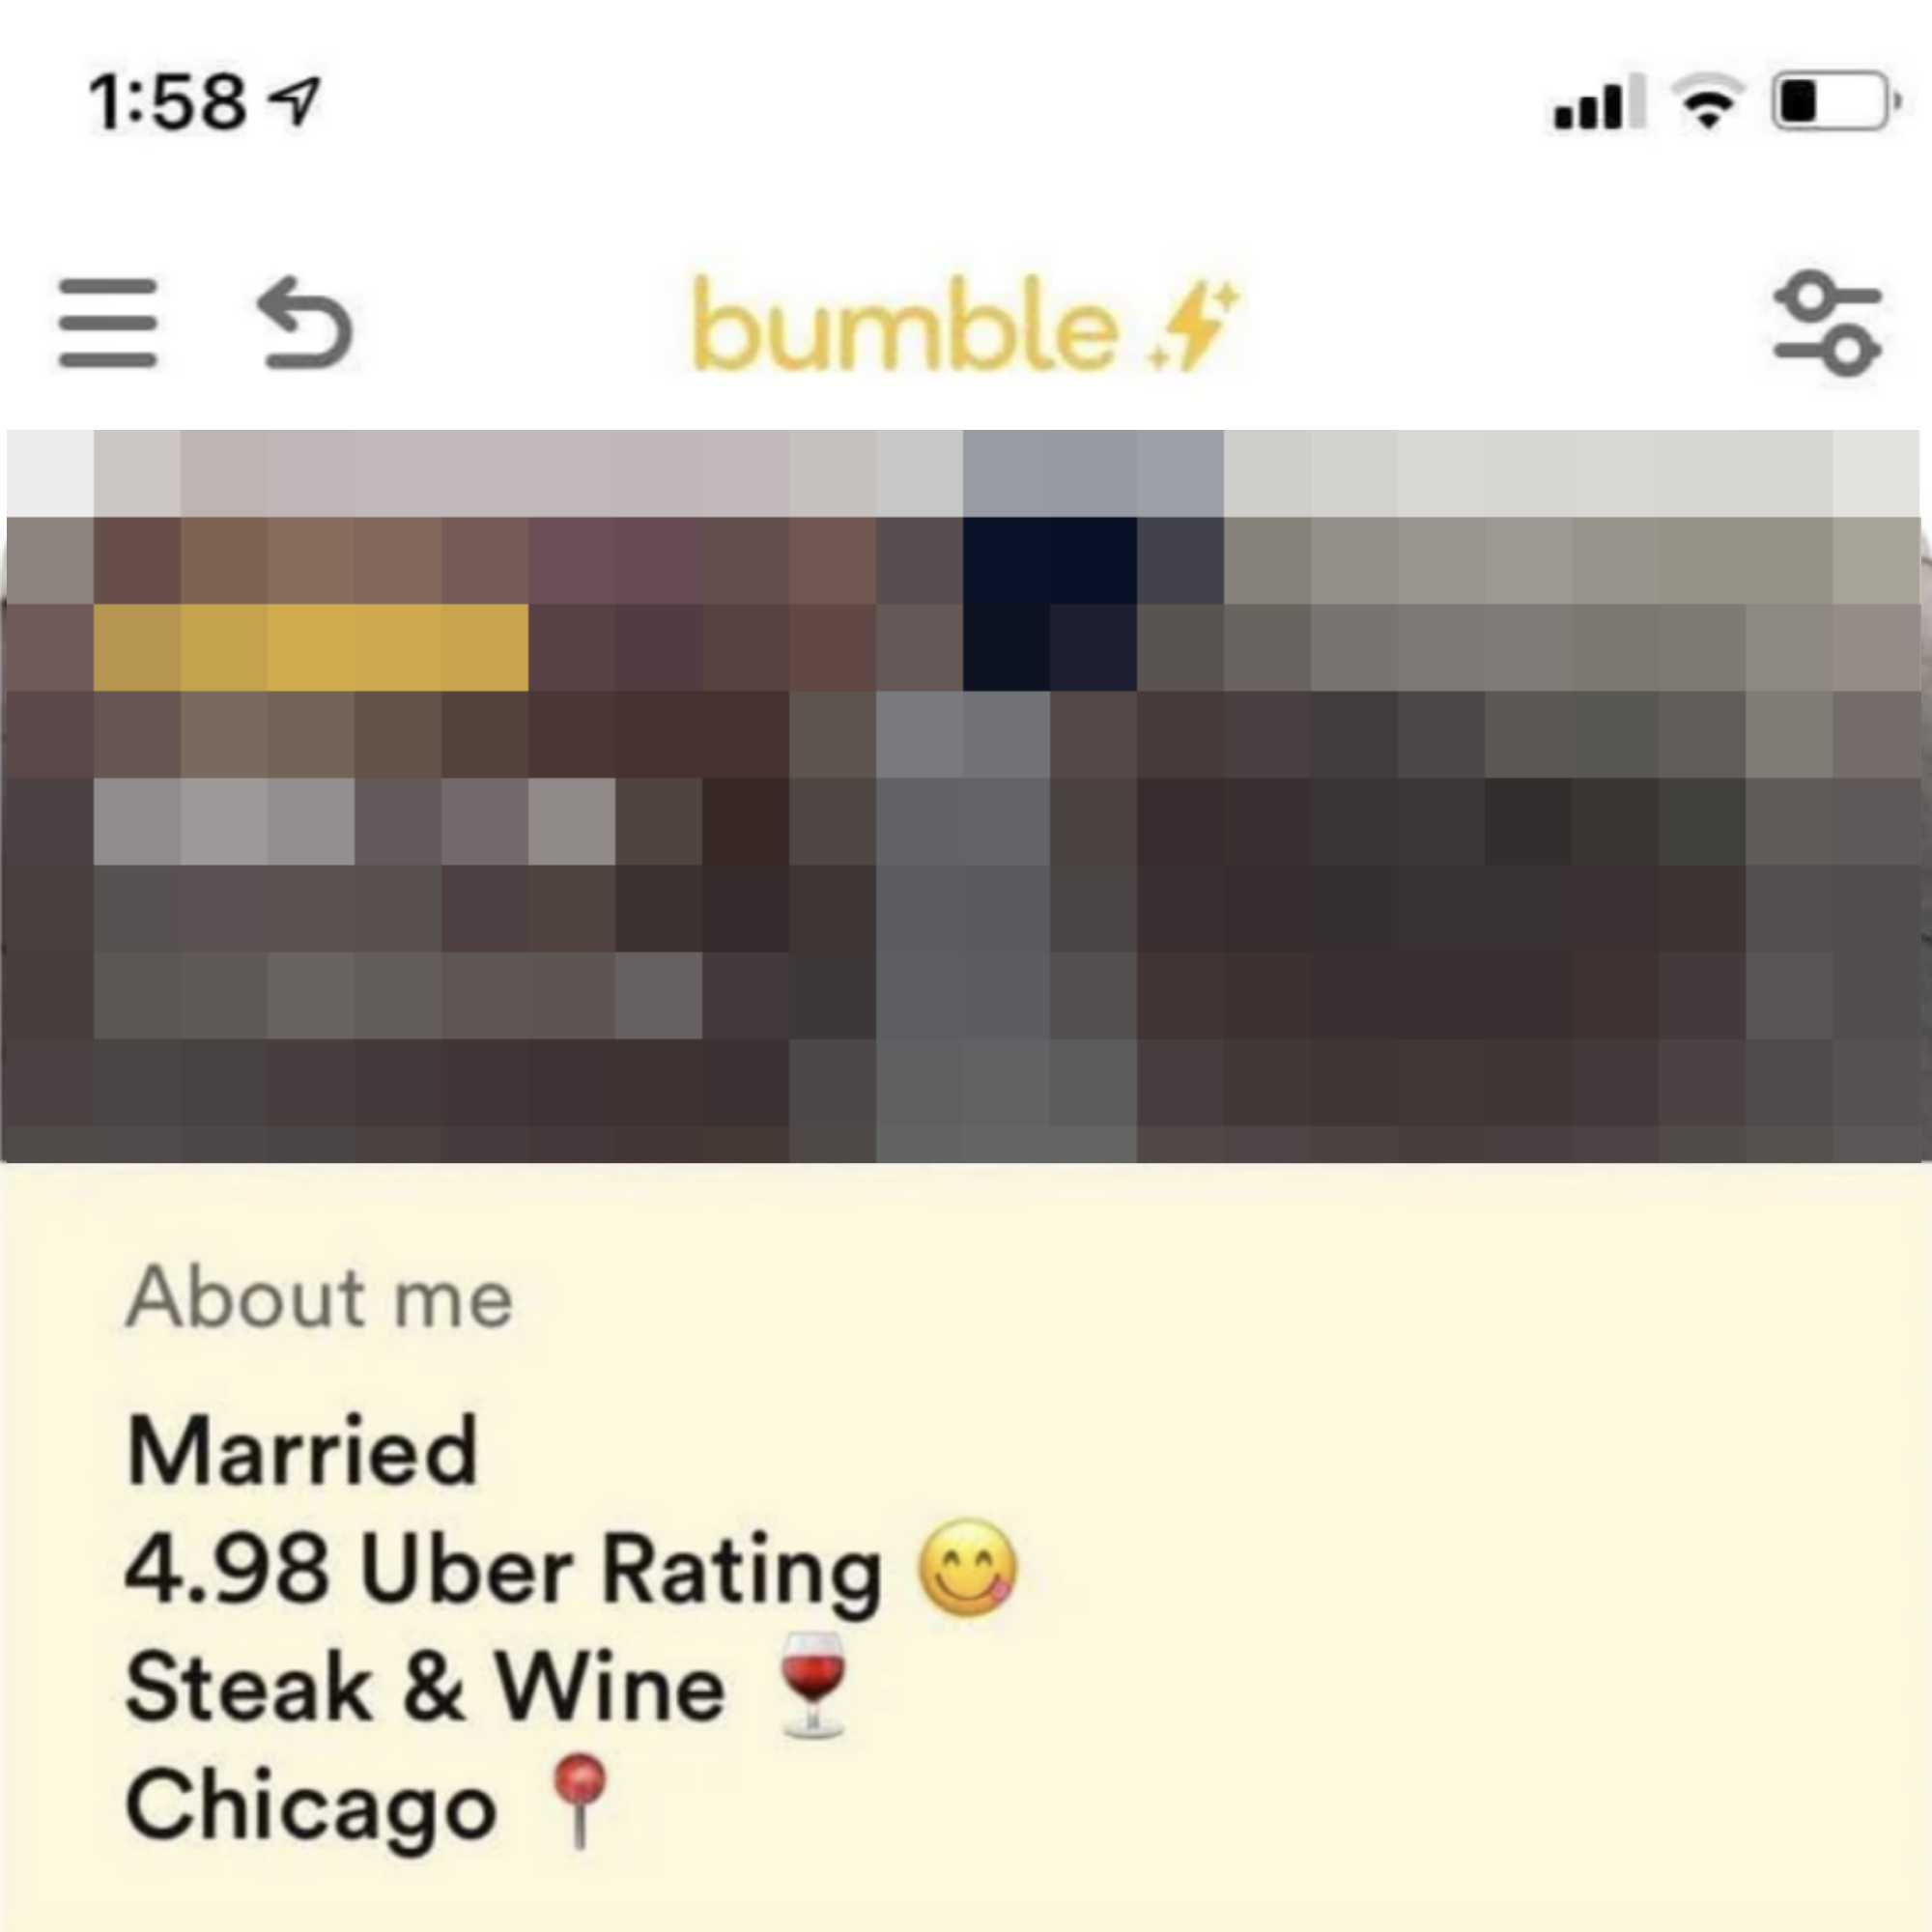 about me: married, 4.8 uber rating, steak and wine, chicago